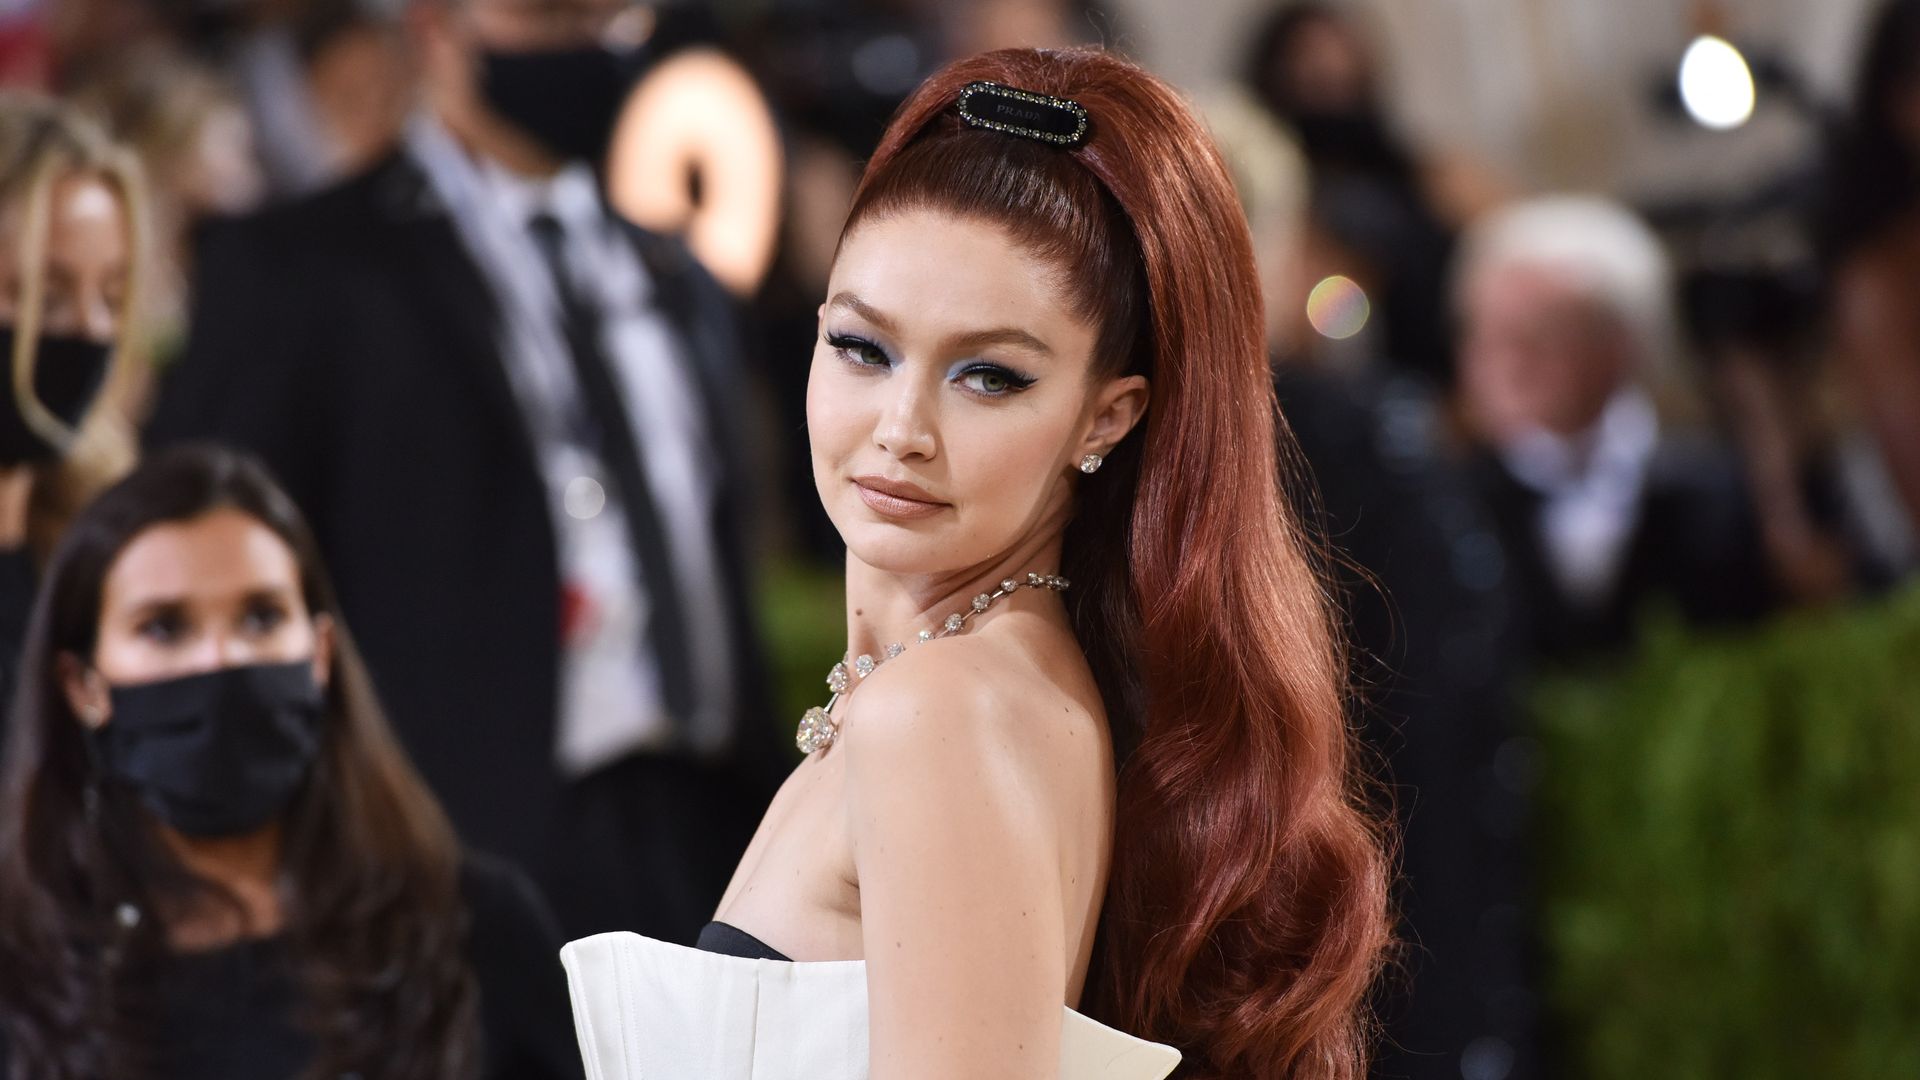 The 21 best Met Gala beauty looks of all time